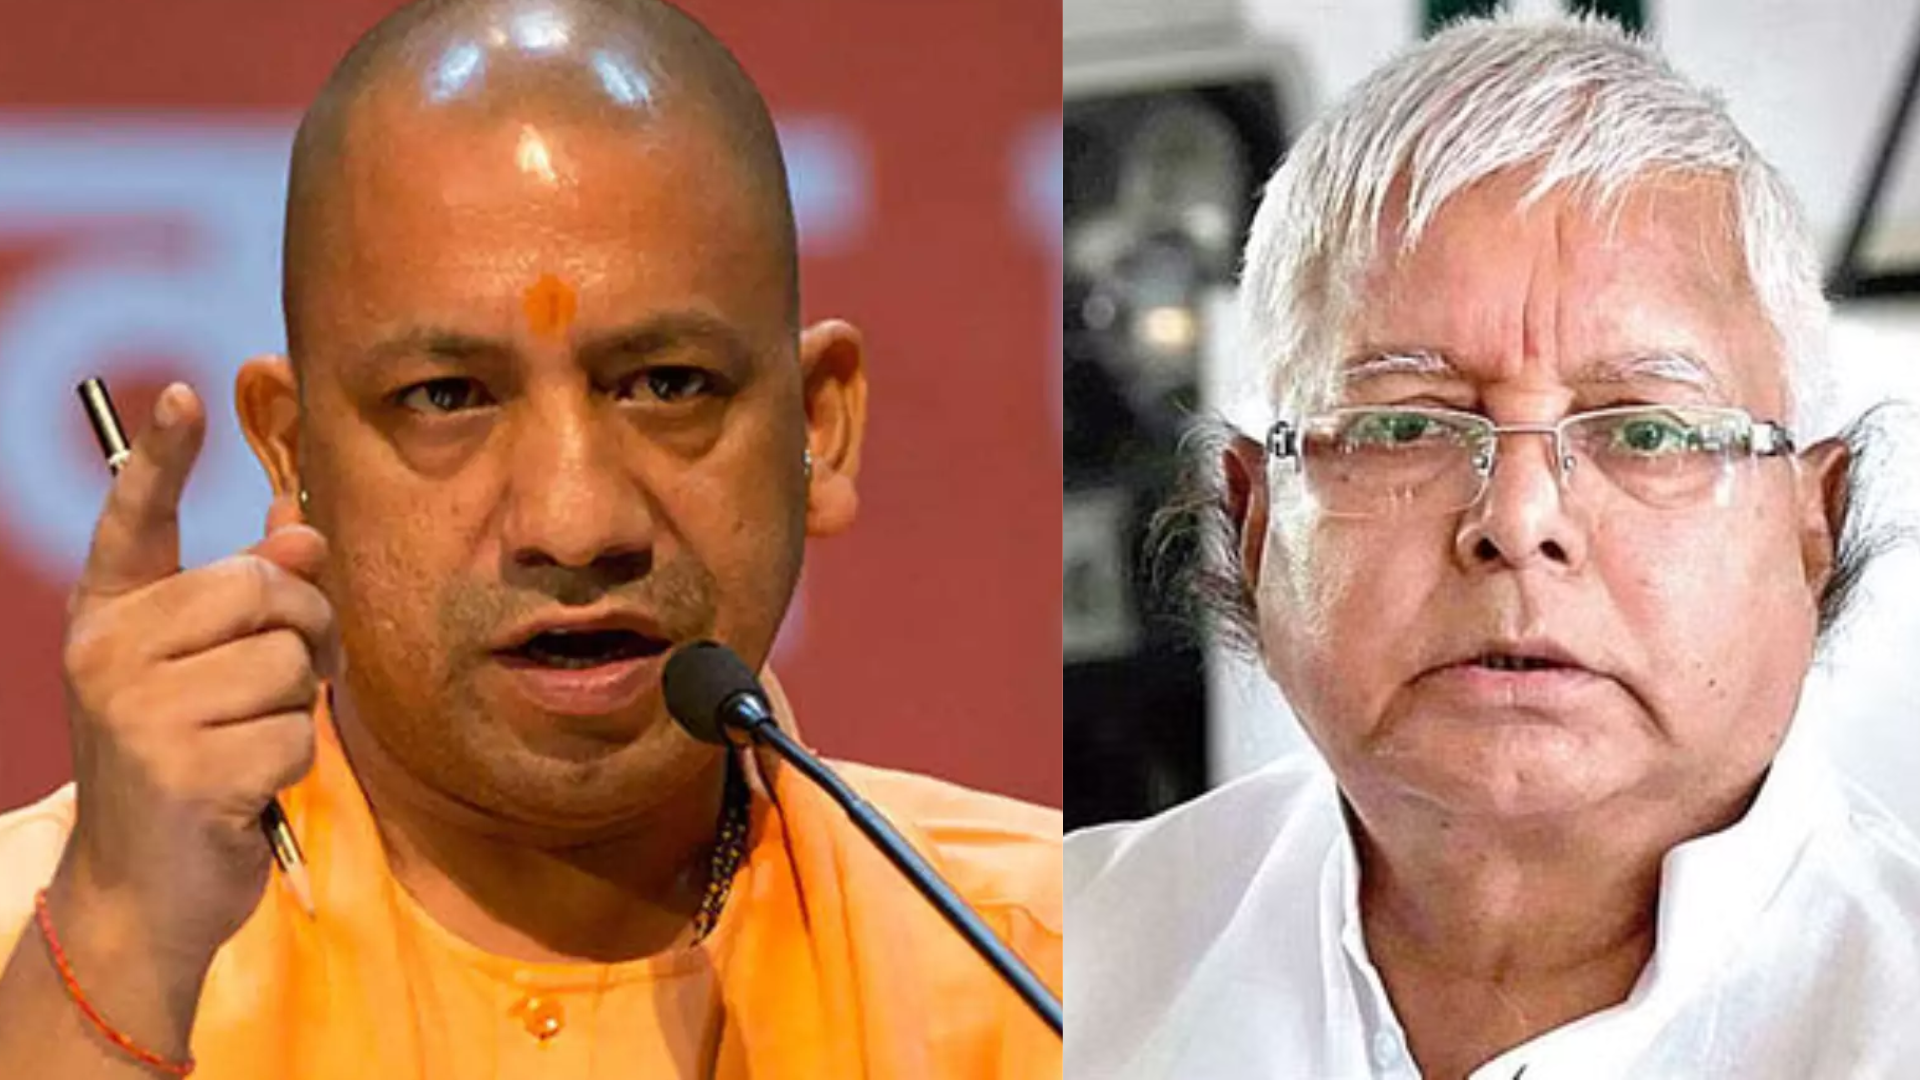 Yogi Adityanath Rebukes Lalu Yadav’s Call for Muslim Reservations, Alleges Threat to Existing Quotas